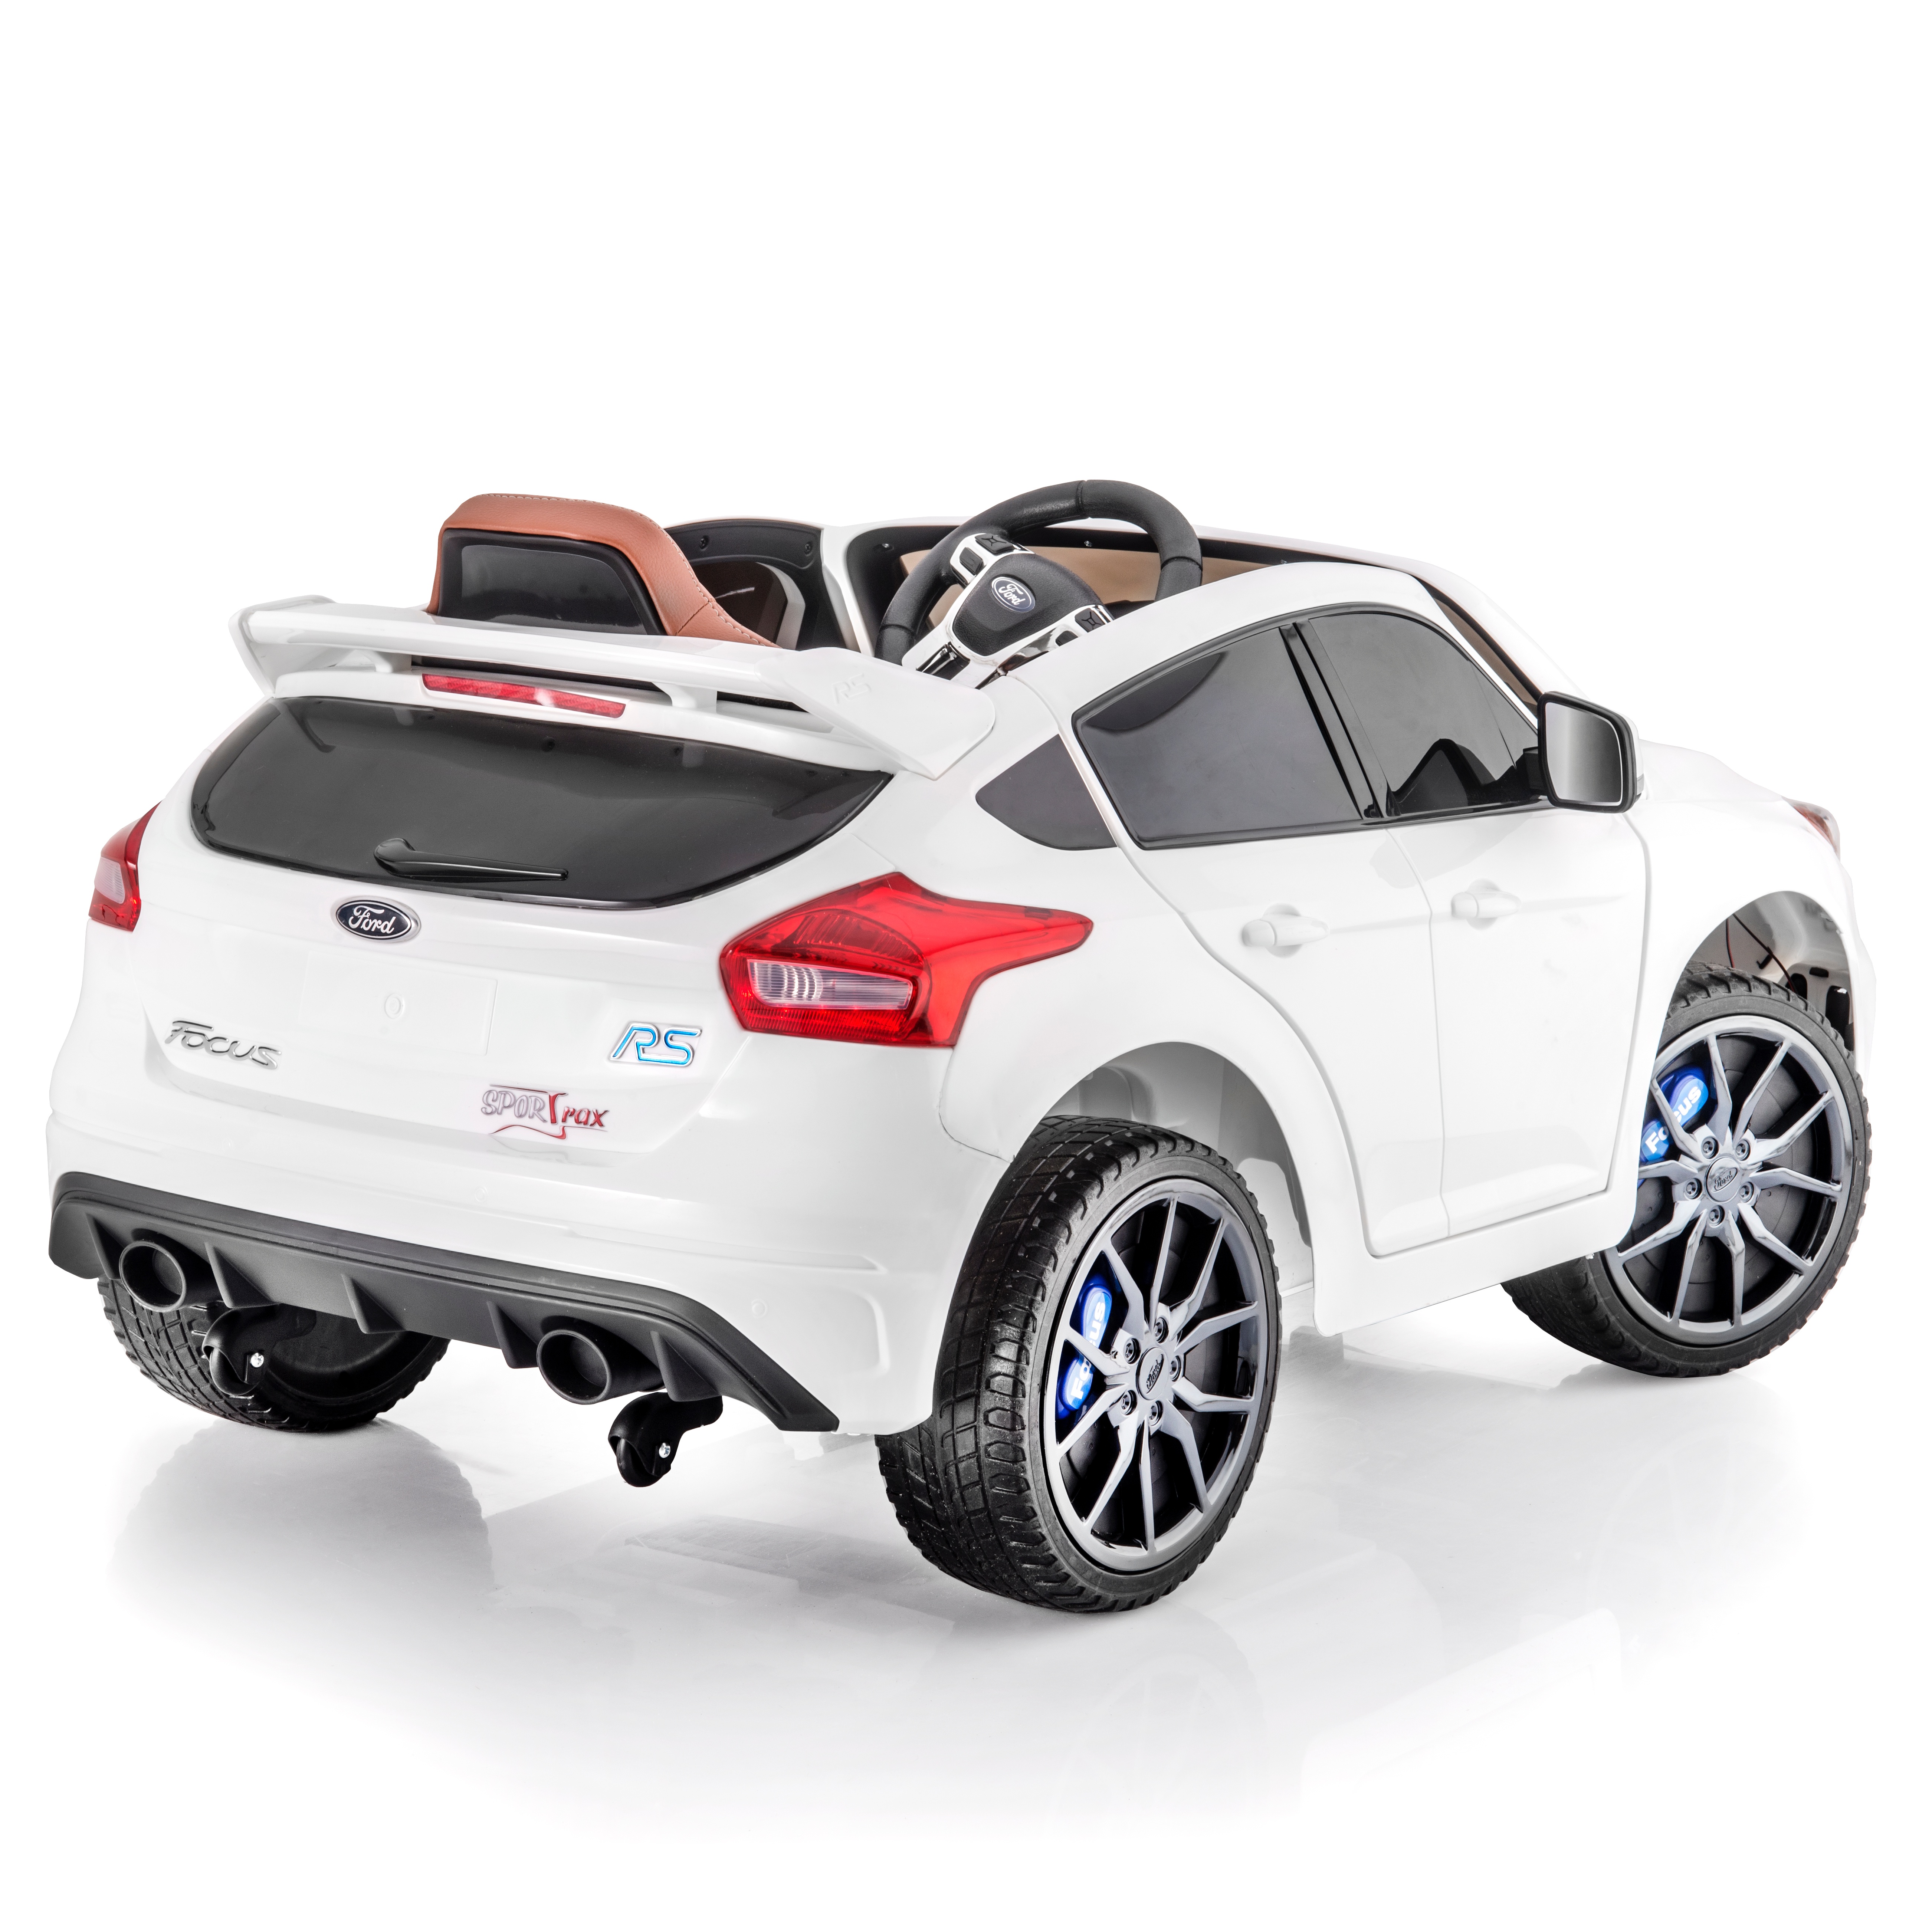 SUPERtrax Licensed Ford Focus RS Kid's Ride On Car, Battery Powered, Remote Control - Frozen White - image 5 of 11